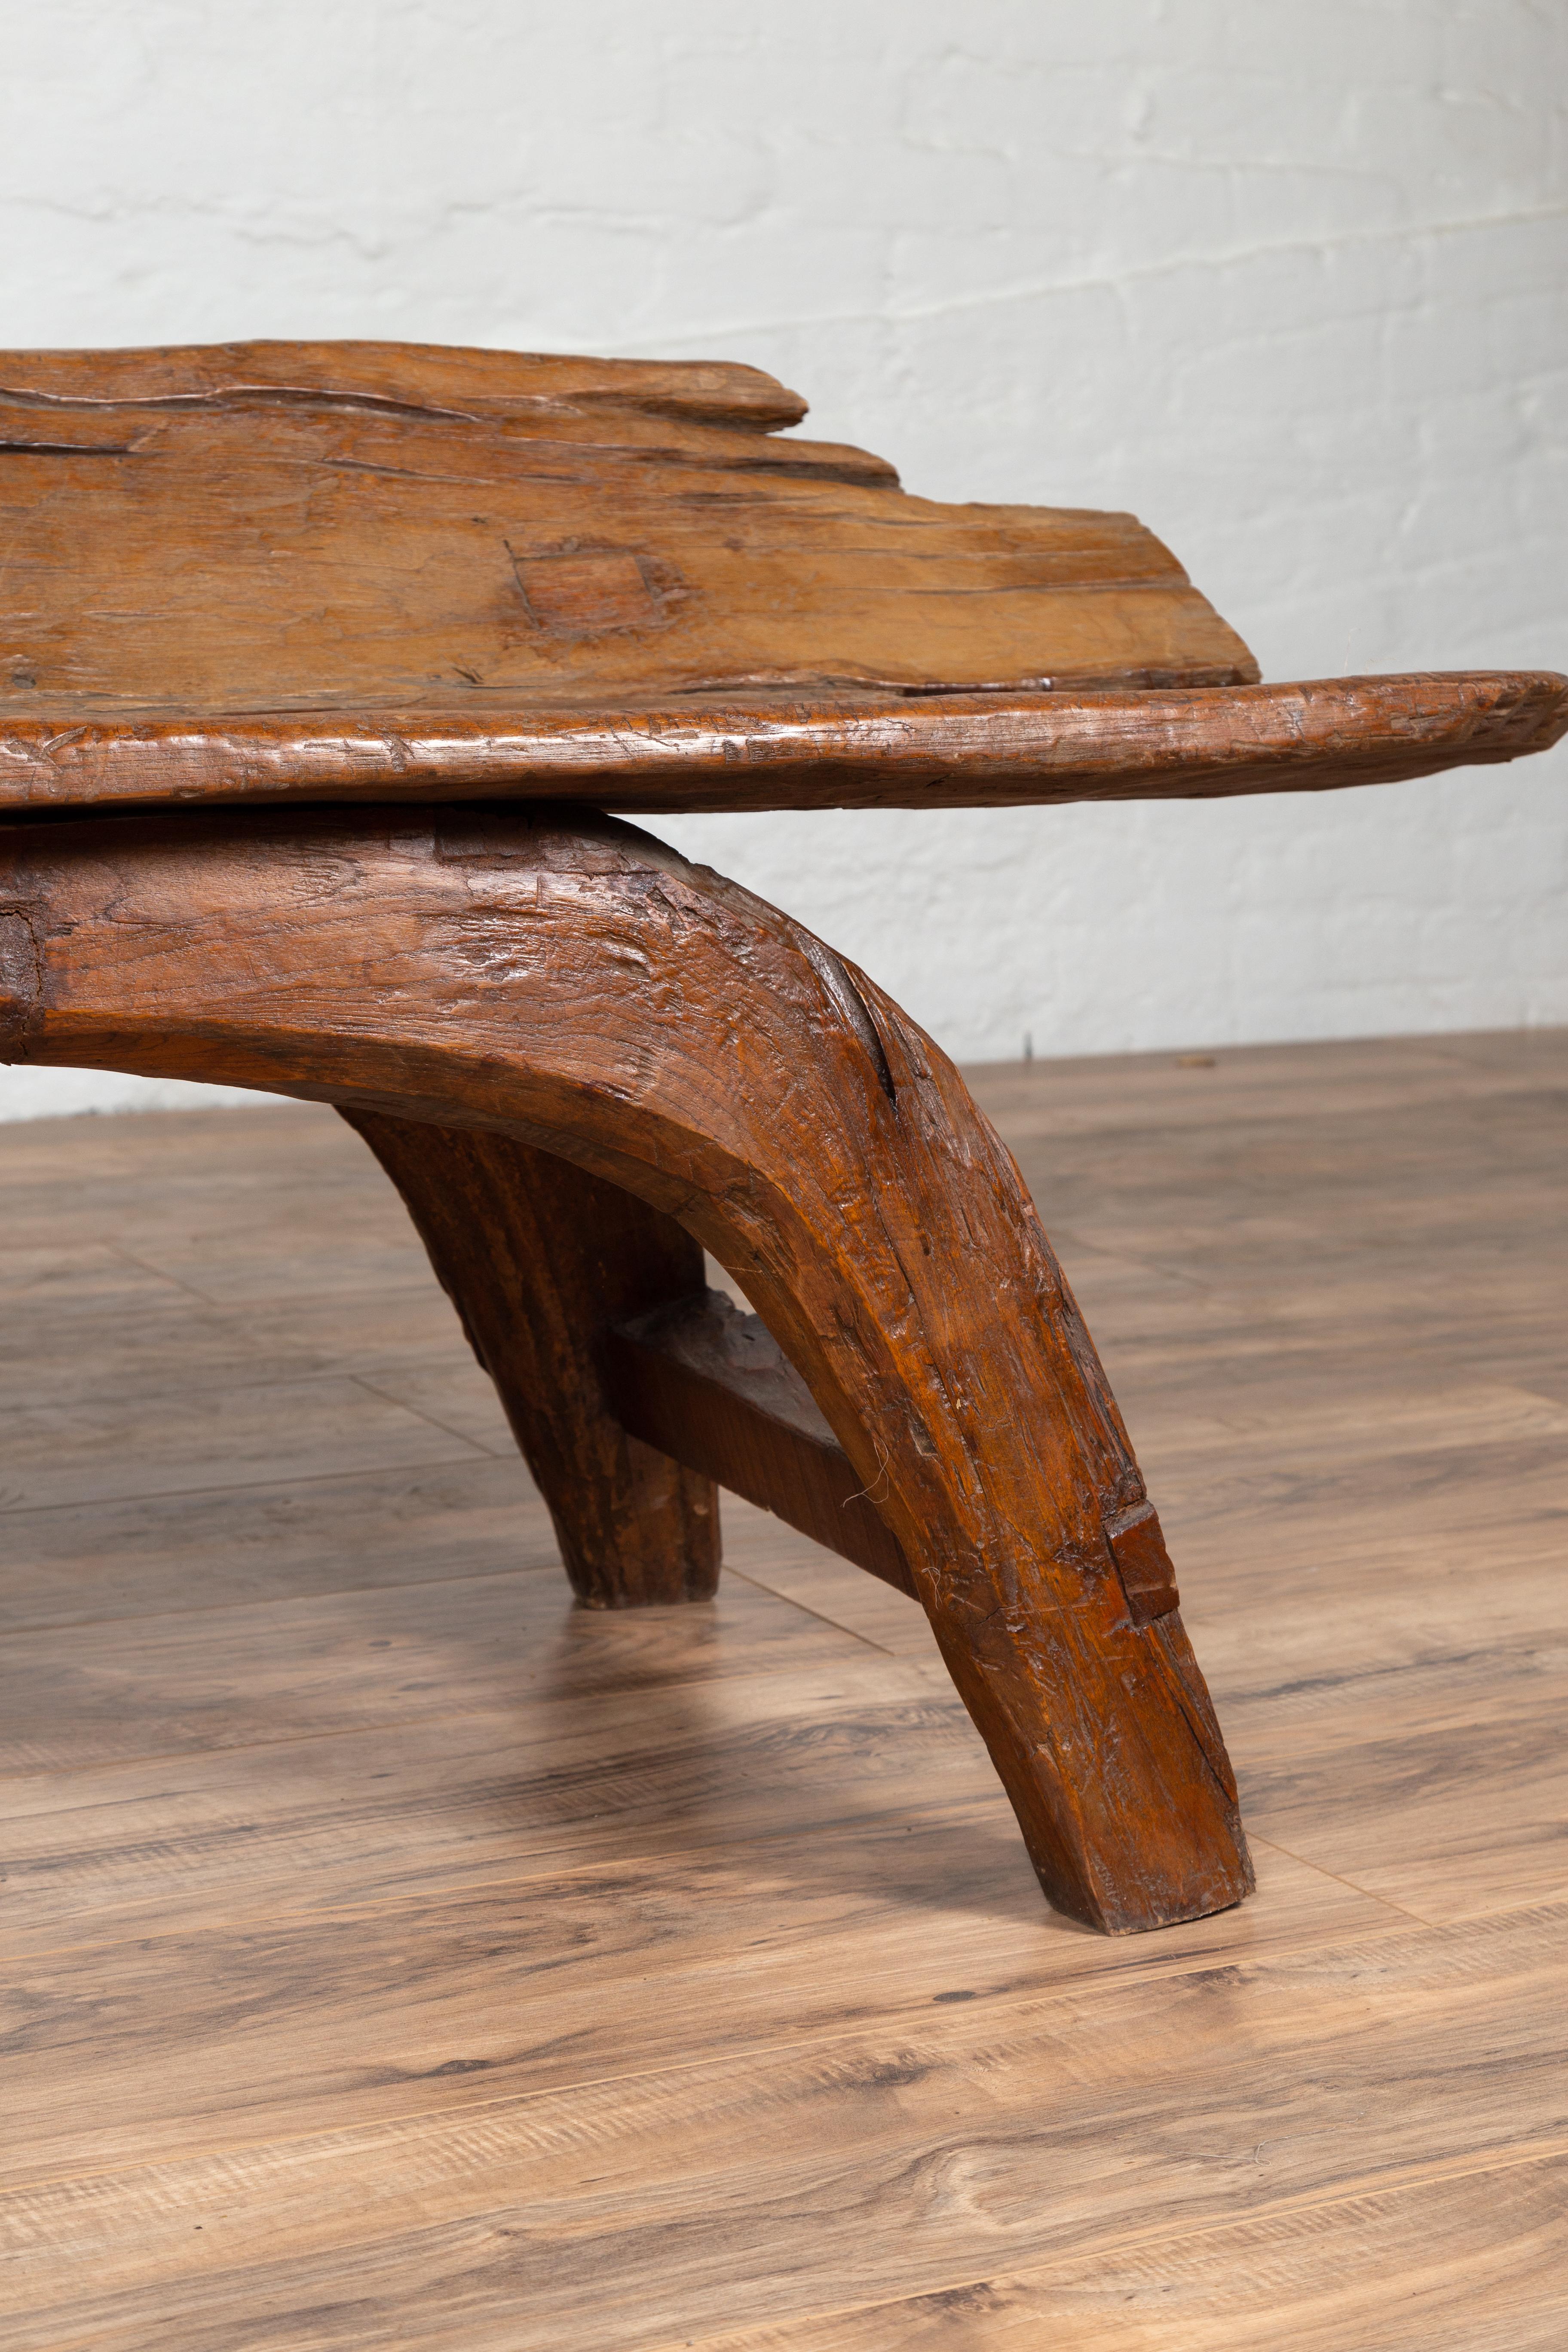 19th Century Freeform Design Antique Wooden Bench from the Riverbed of Bali with Arching Base